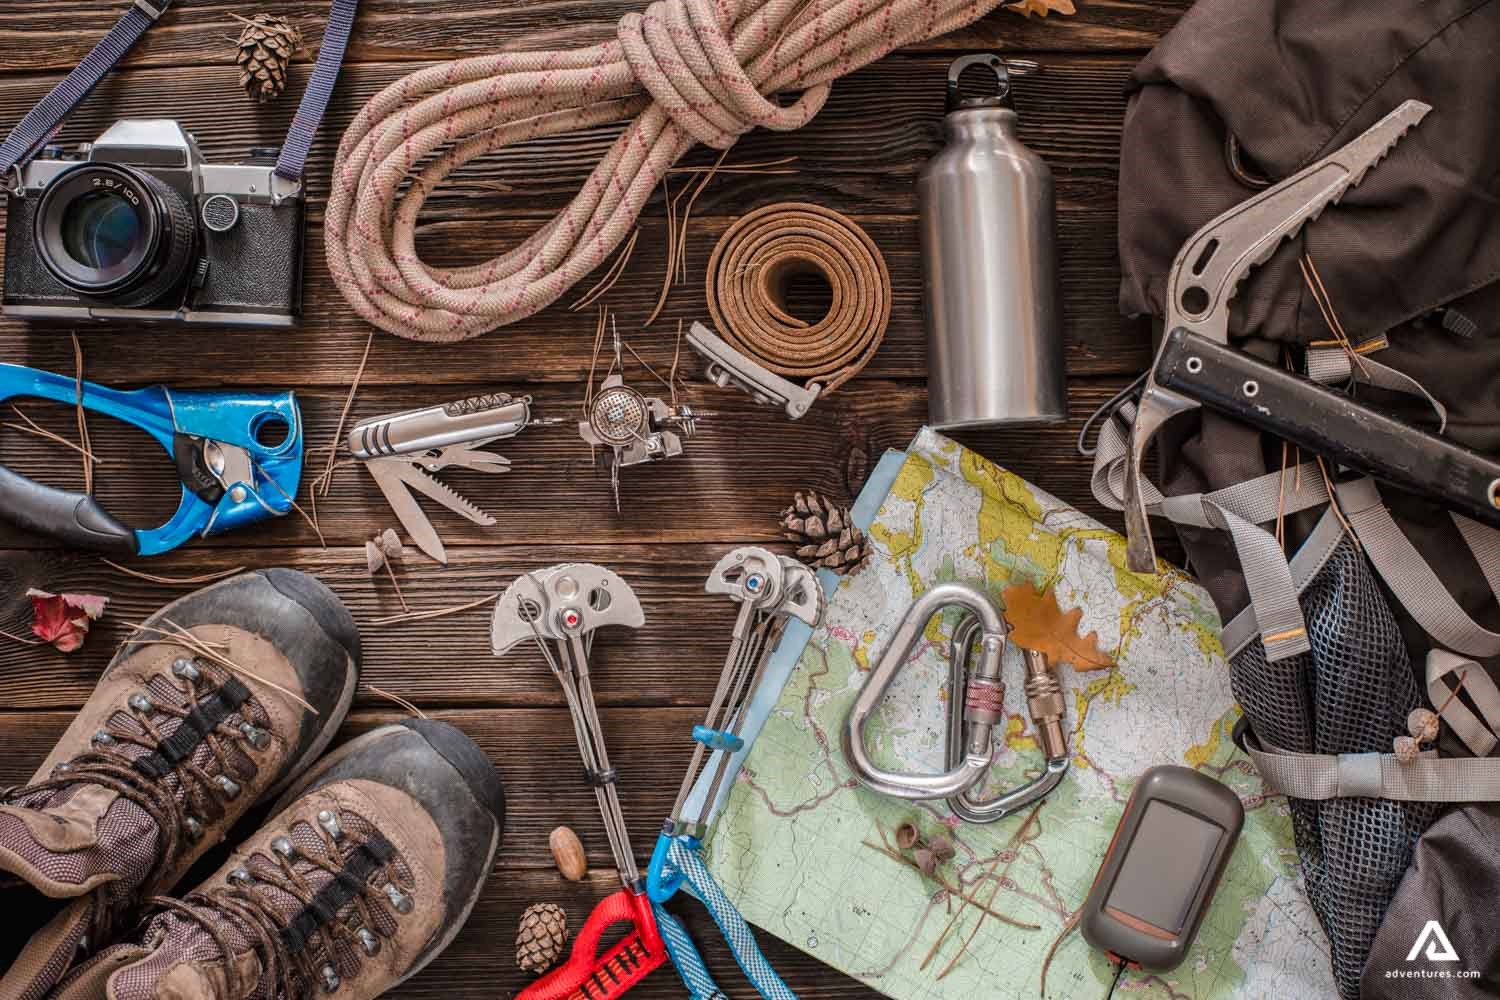 Equipment for Mountaineering and Hiking